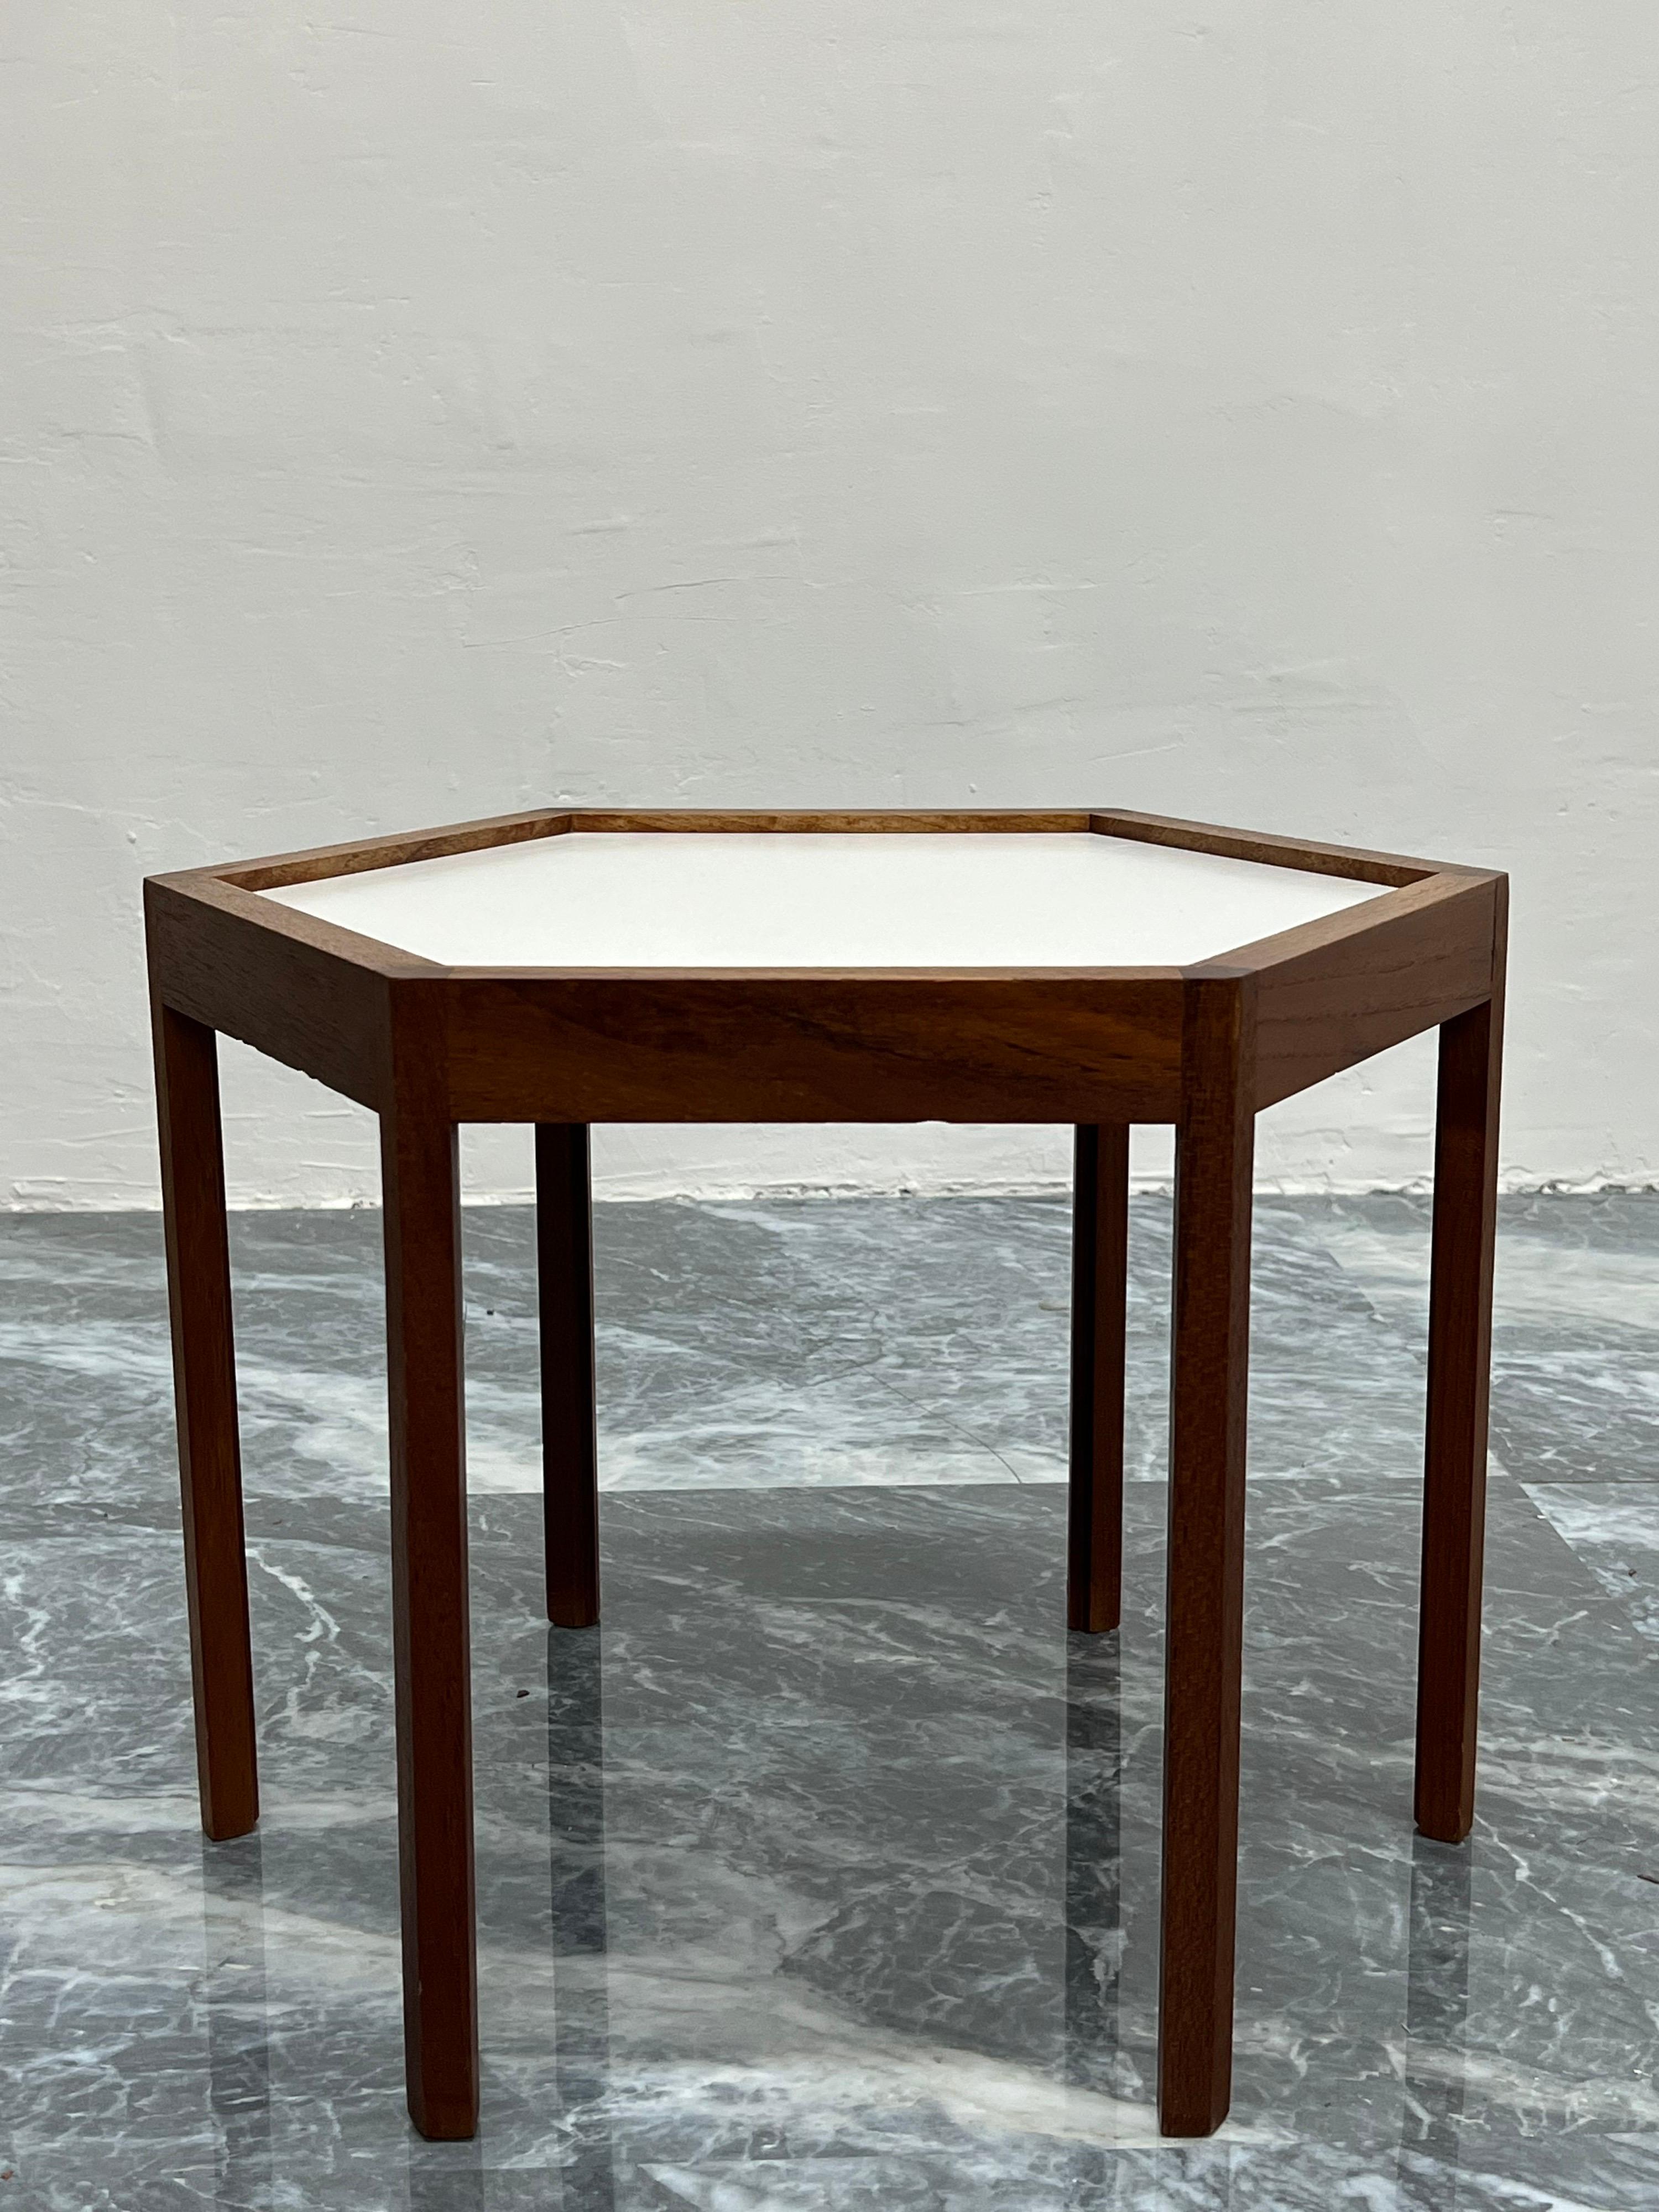 Hans C. Andersen Hexagonal Rosewood and White Laminate Danish Side Table, 1960s For Sale 1